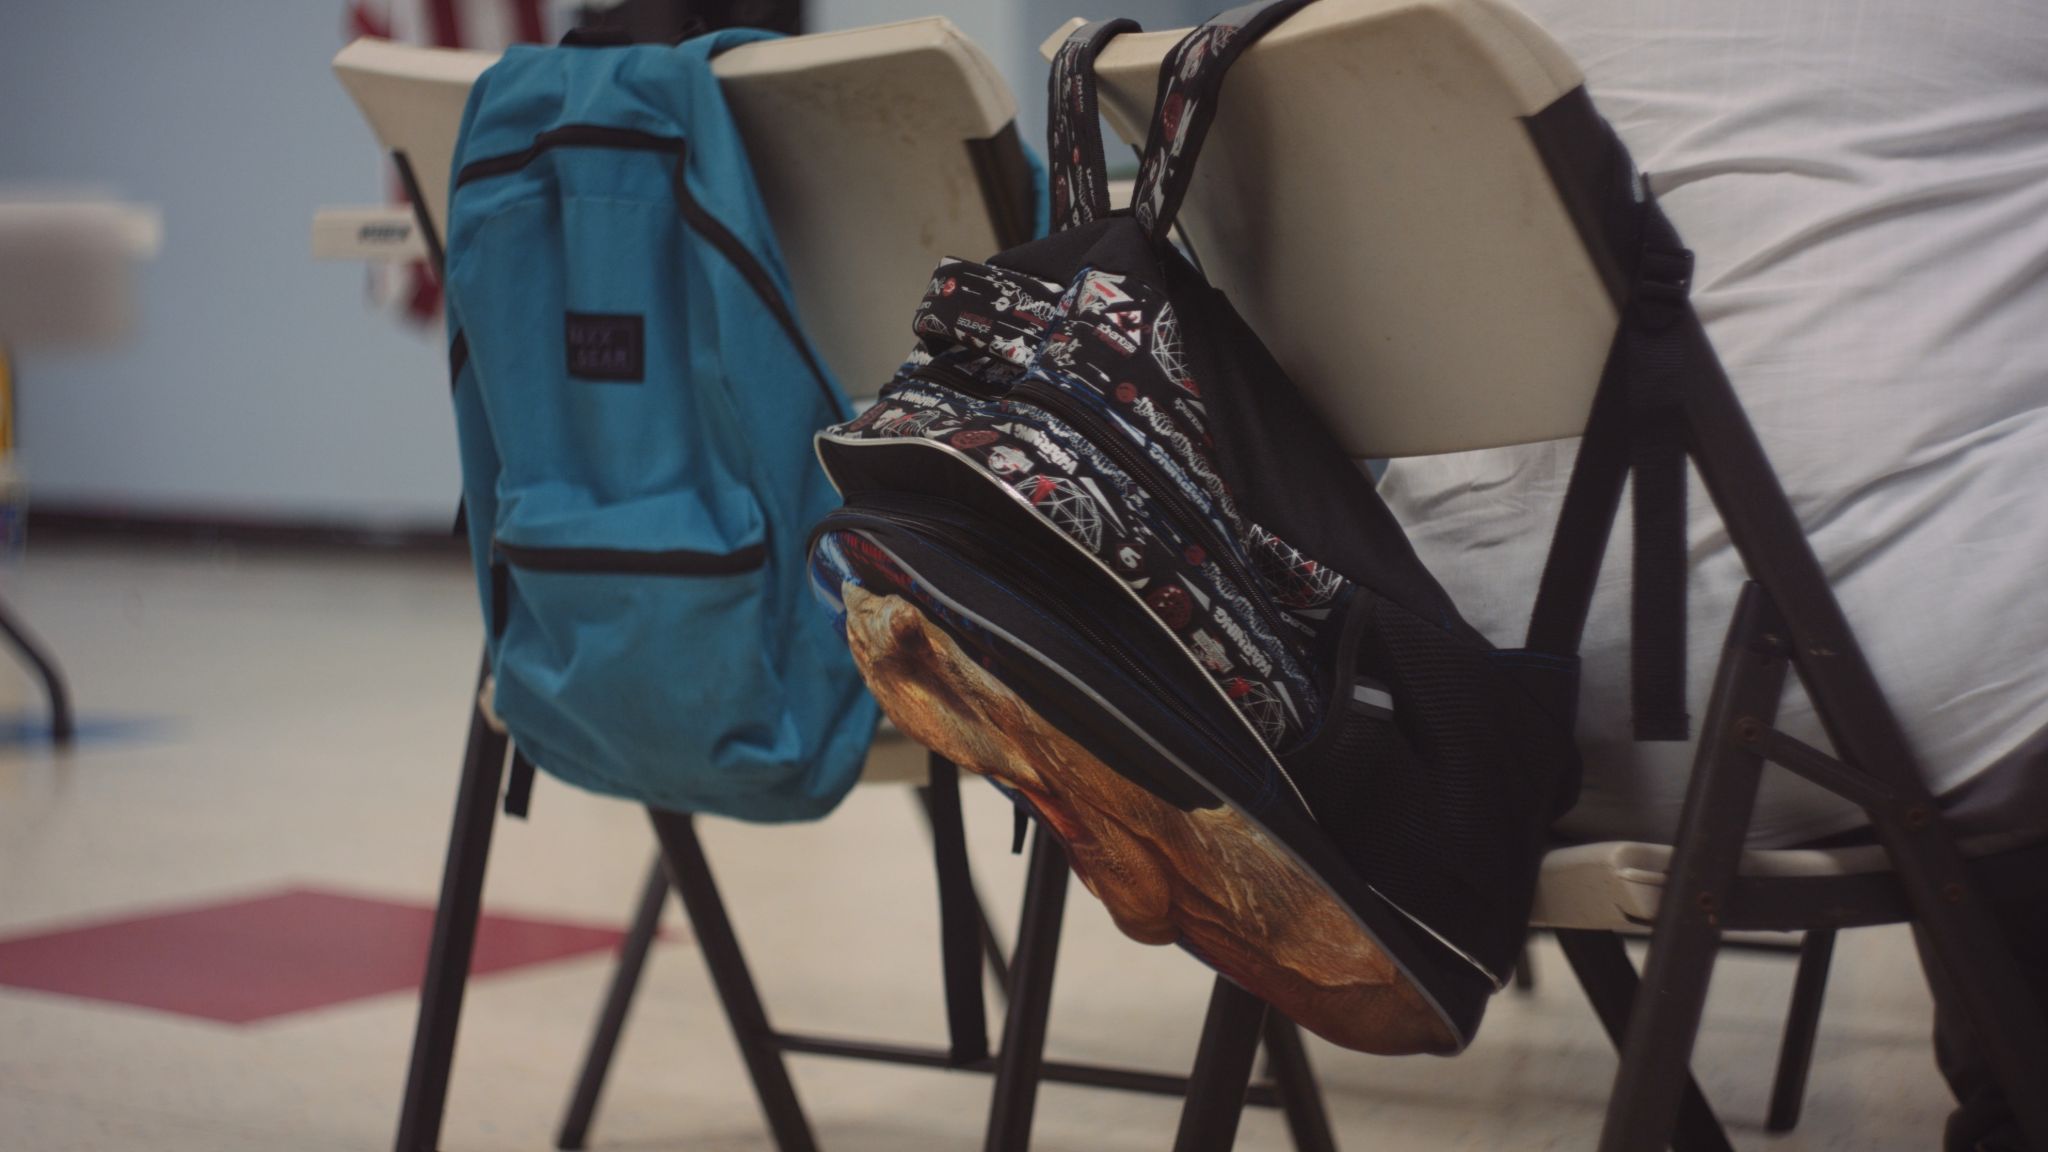 Closeup of backpacks hanging from the back of chairs